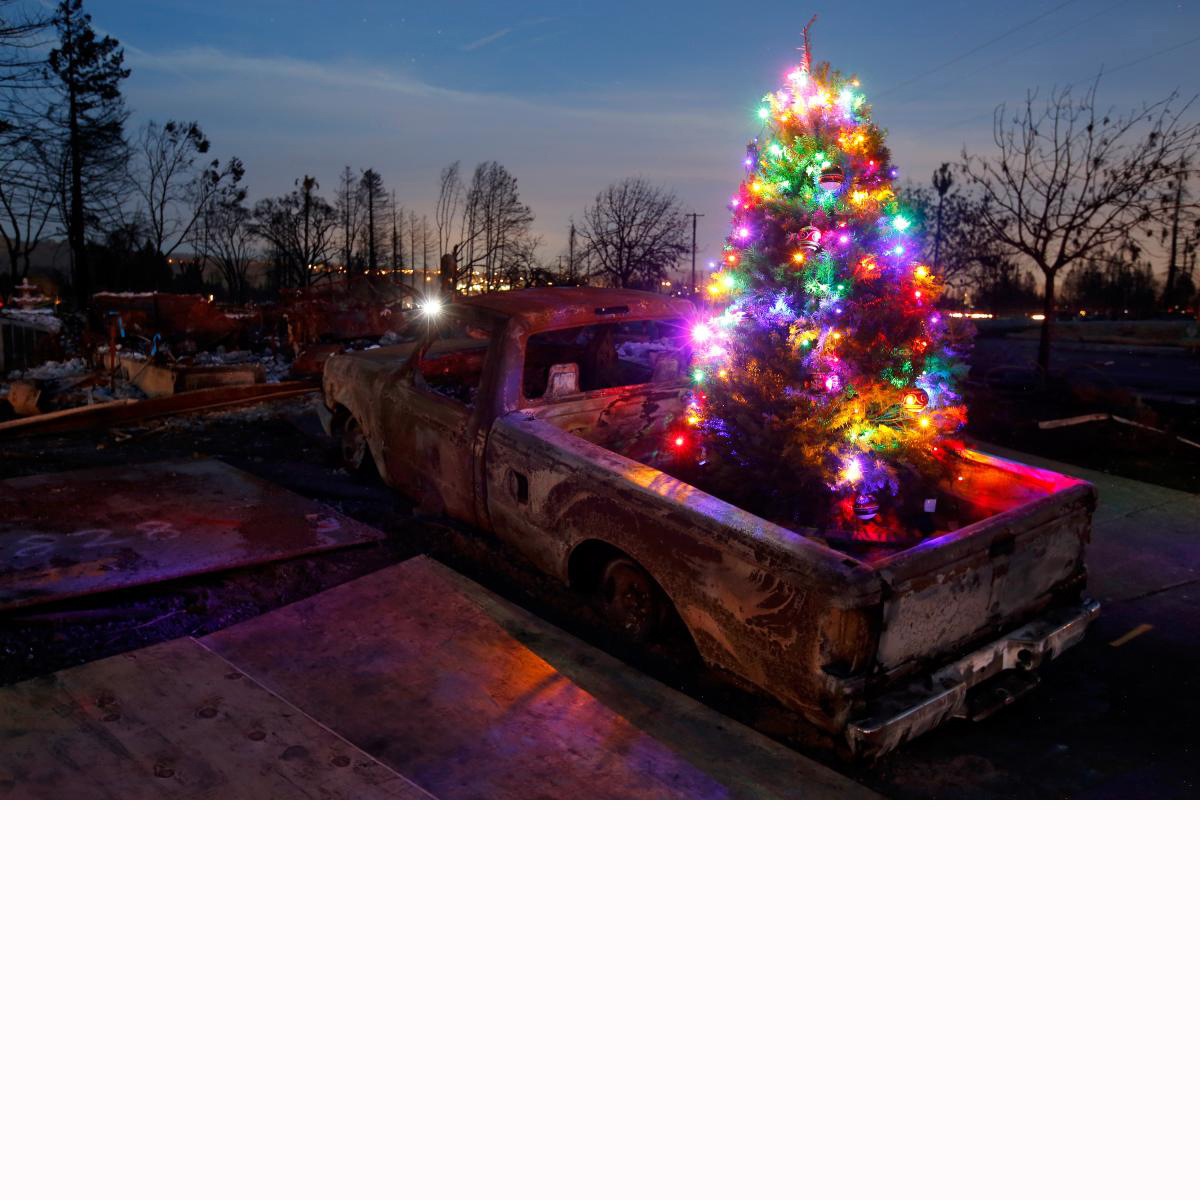 Picture of Christmas tree in a burned truck